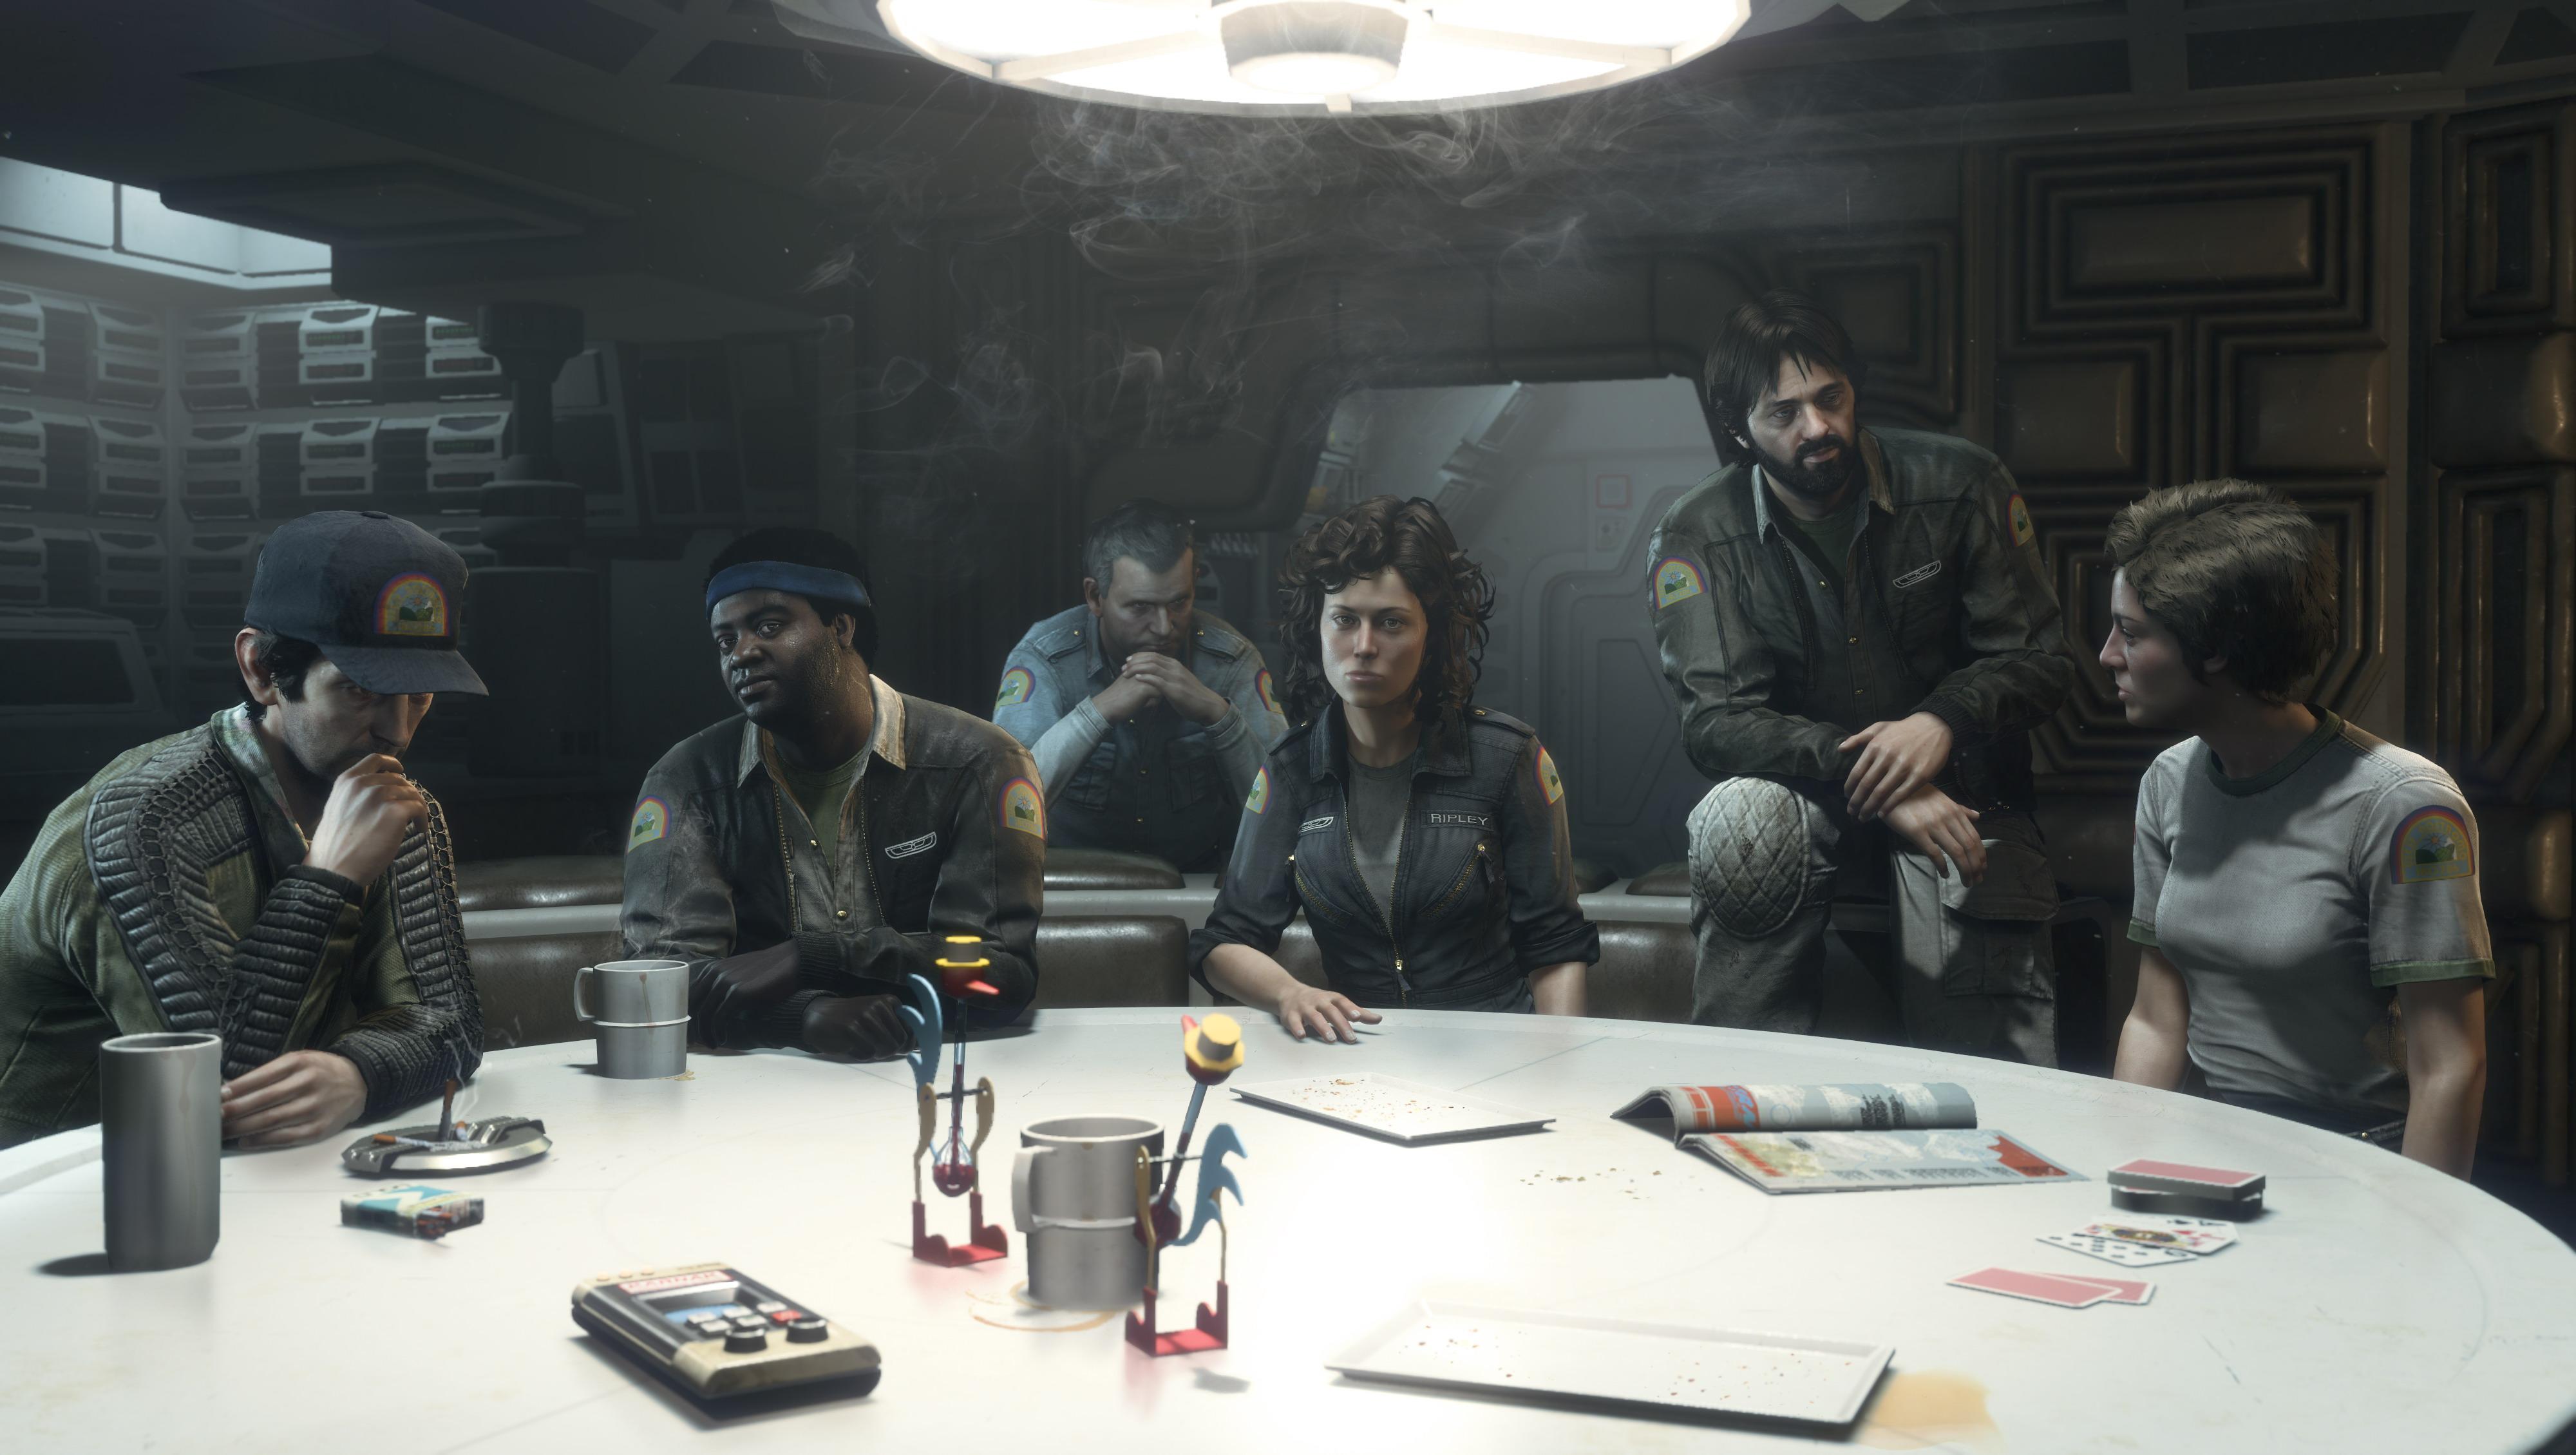 Sigourney Weaver to Reprise Role as Ripley in “Alien: Isolation” DLC